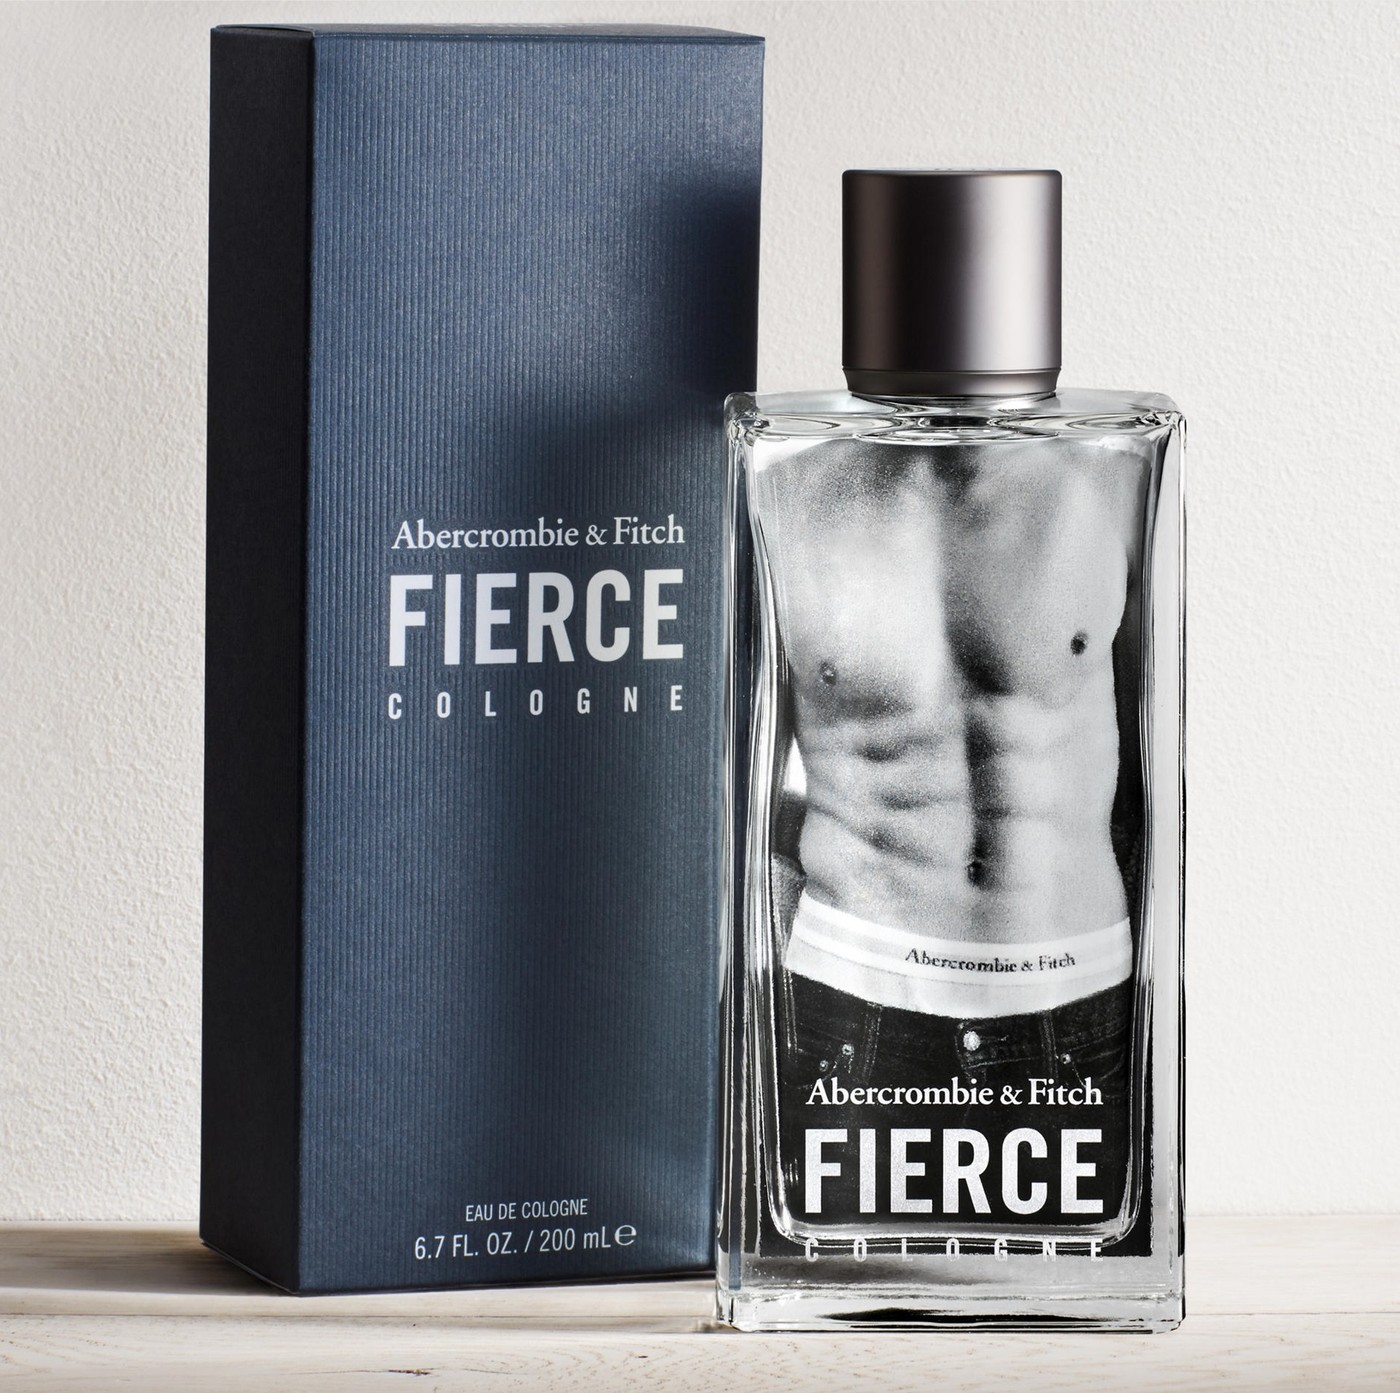 Парфюм Abercrombie & Fitch Fierce Cologne 200 мл